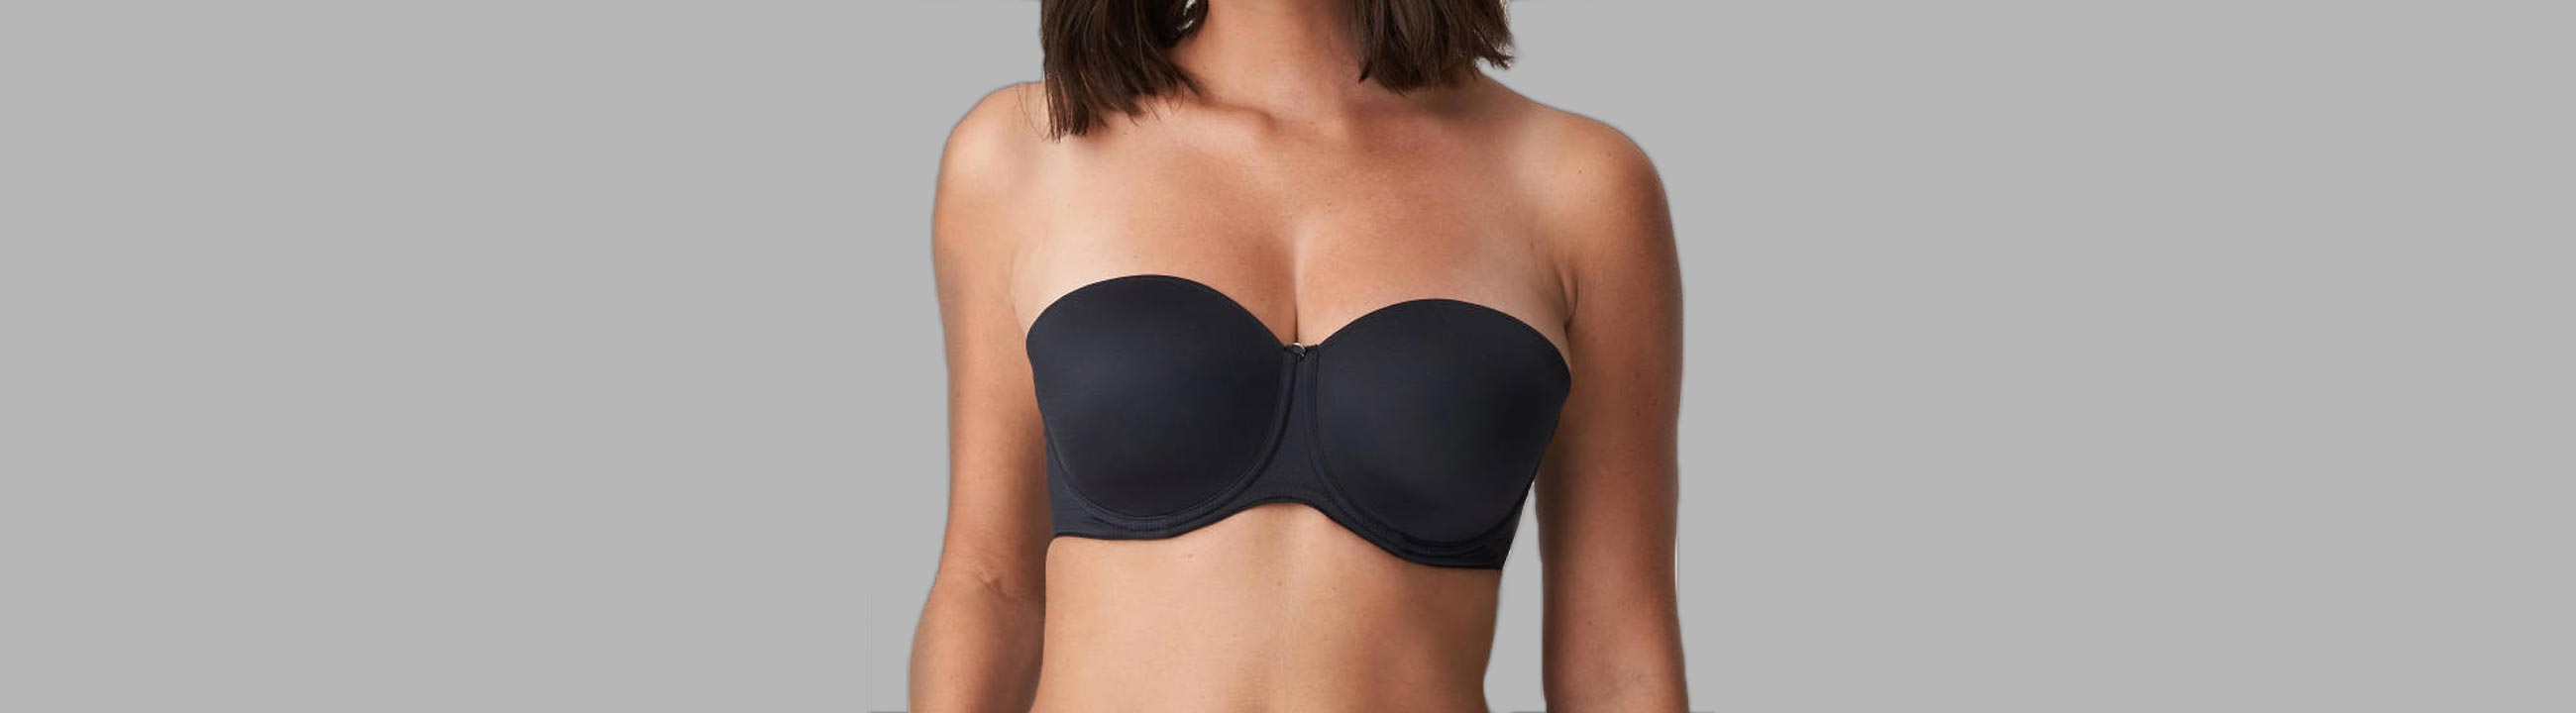 Strapless Bras from Top Designers